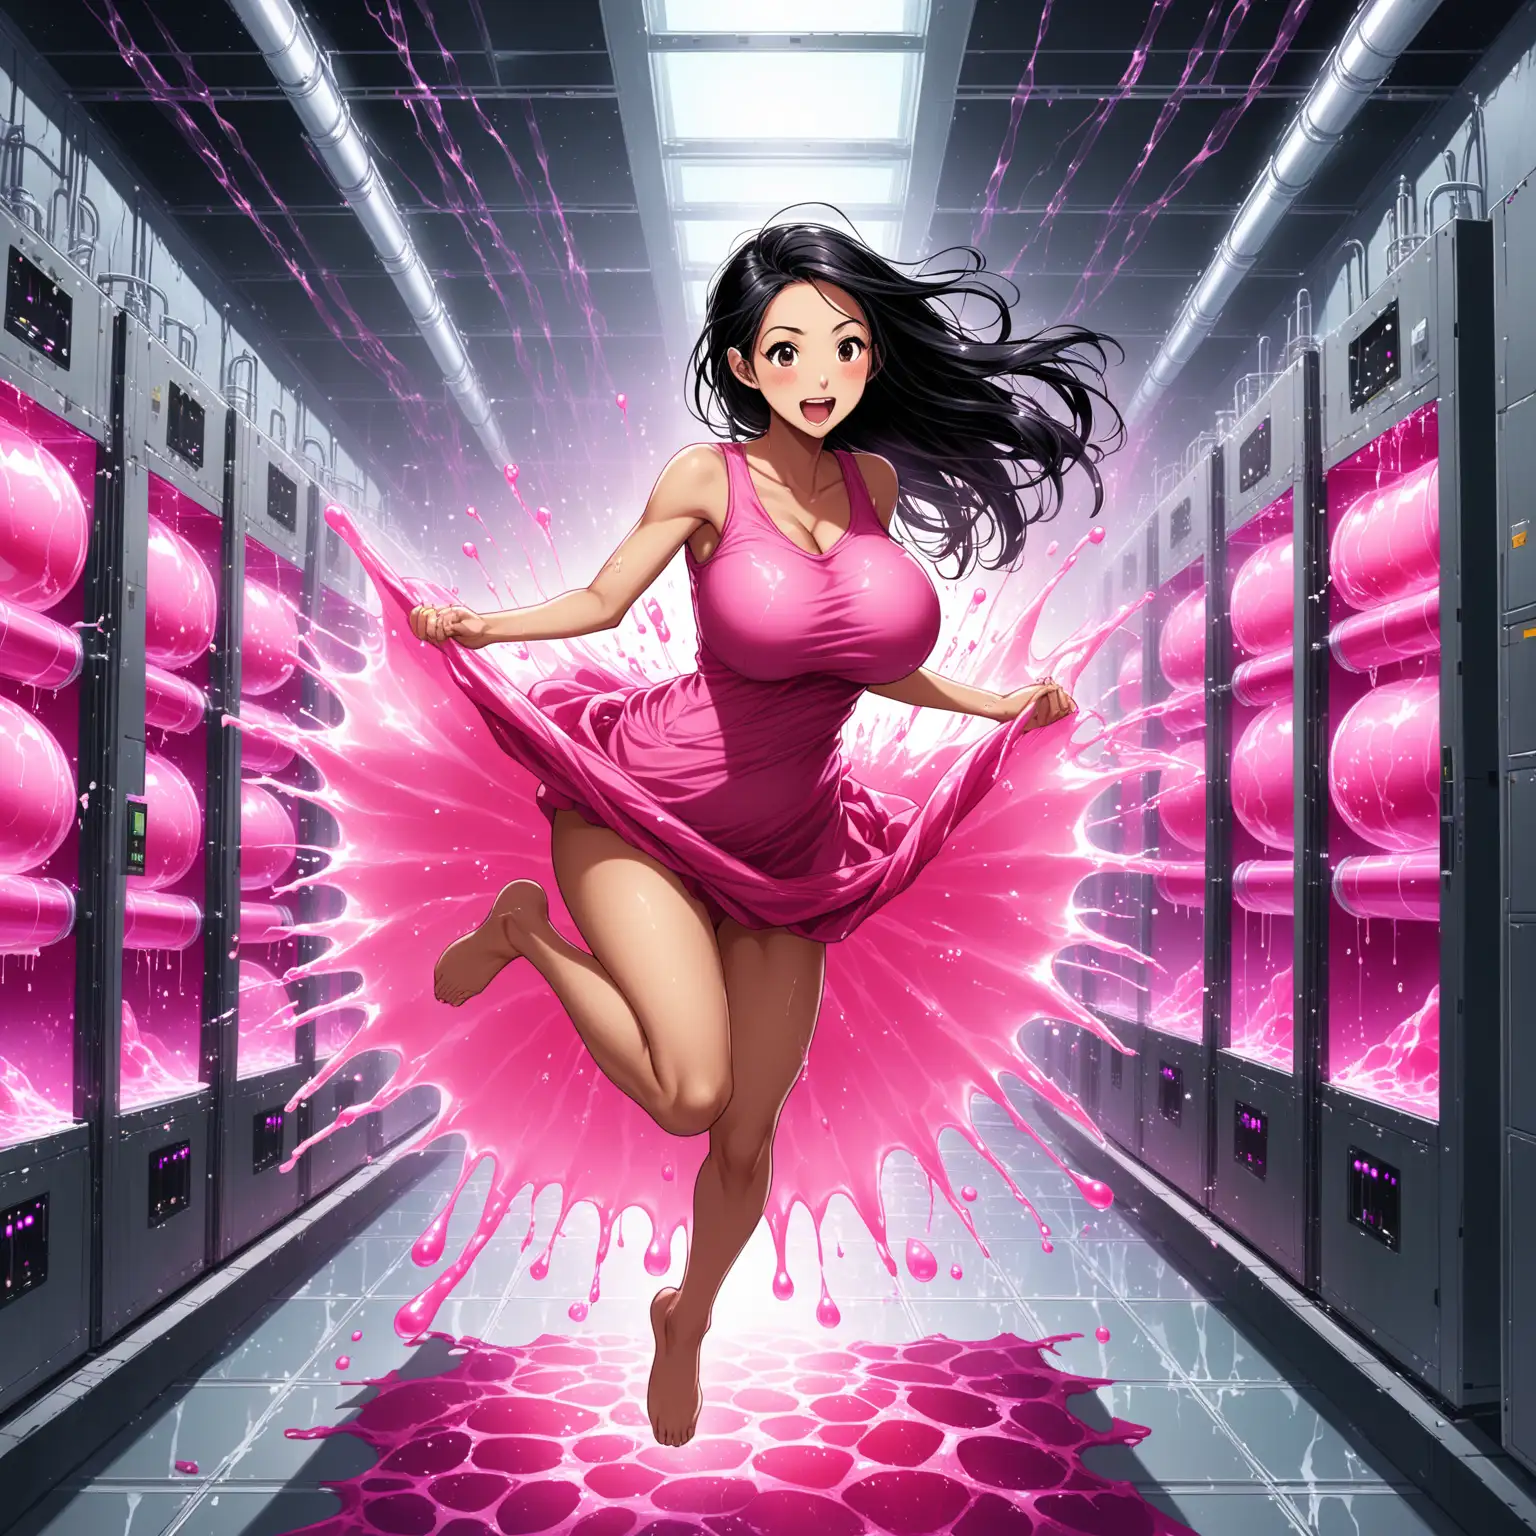 beautiful skinny indonesian woman leaning forward, huge breasts, wrapping herself in pink mutating material shirt and dress, fully dressed, long black hair half pink, happy idea, unbelievable, ecstasy, in spaceship laboratory storage room with cracked glass tubes on the wall, pink goo dripping, experiment chamber pool, jumping up, energetic surge transforming clothes 